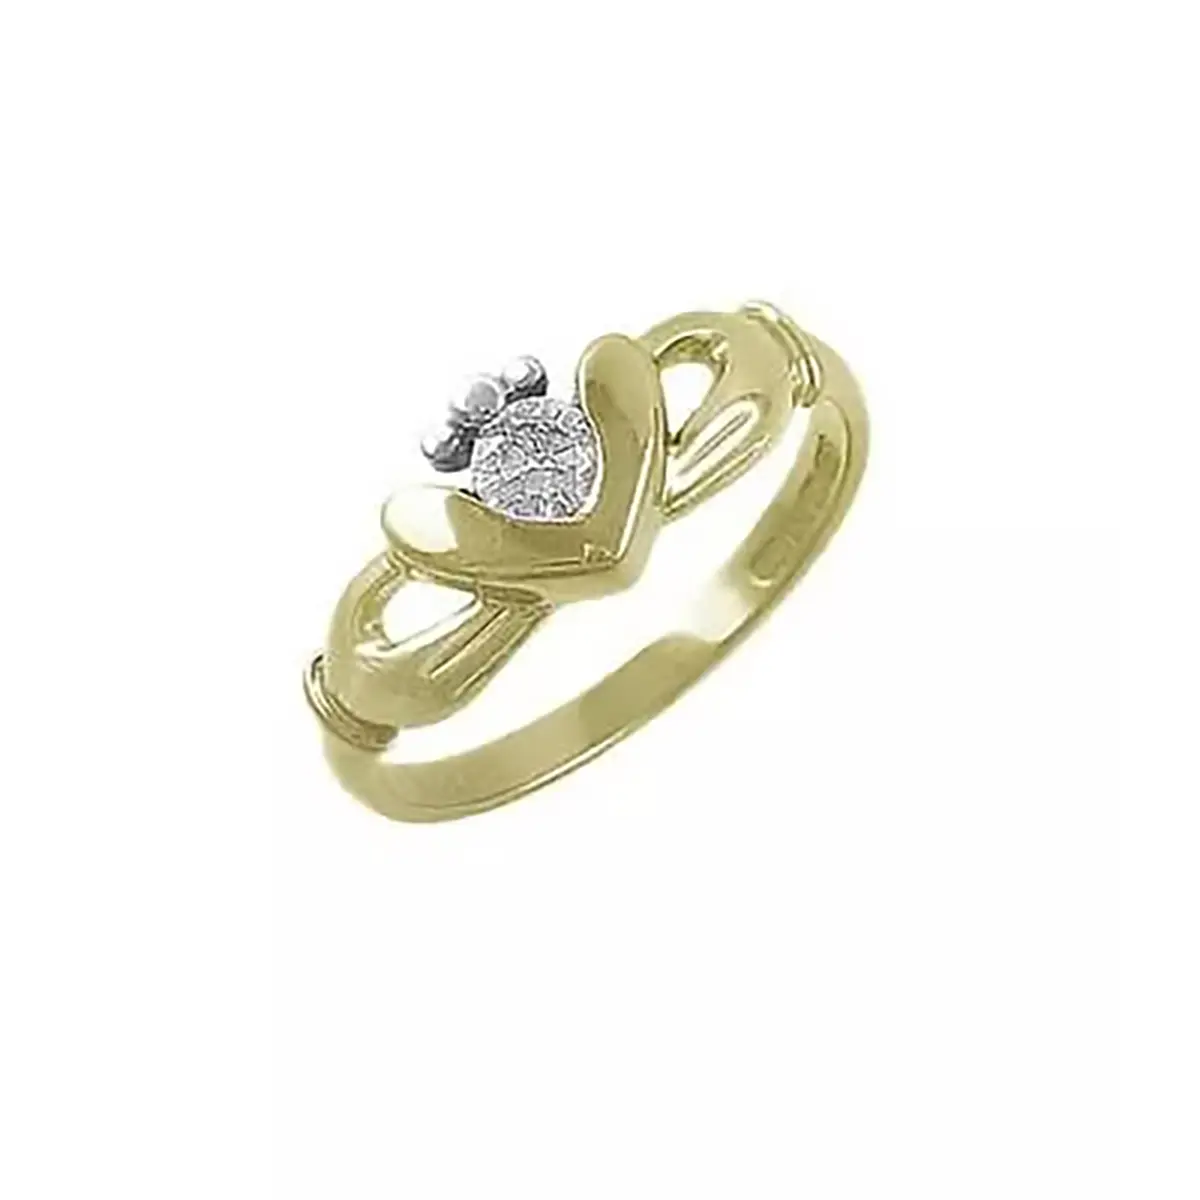 Beautiful Single Stone Diamond Claddagh Ring Crafted In Gold...